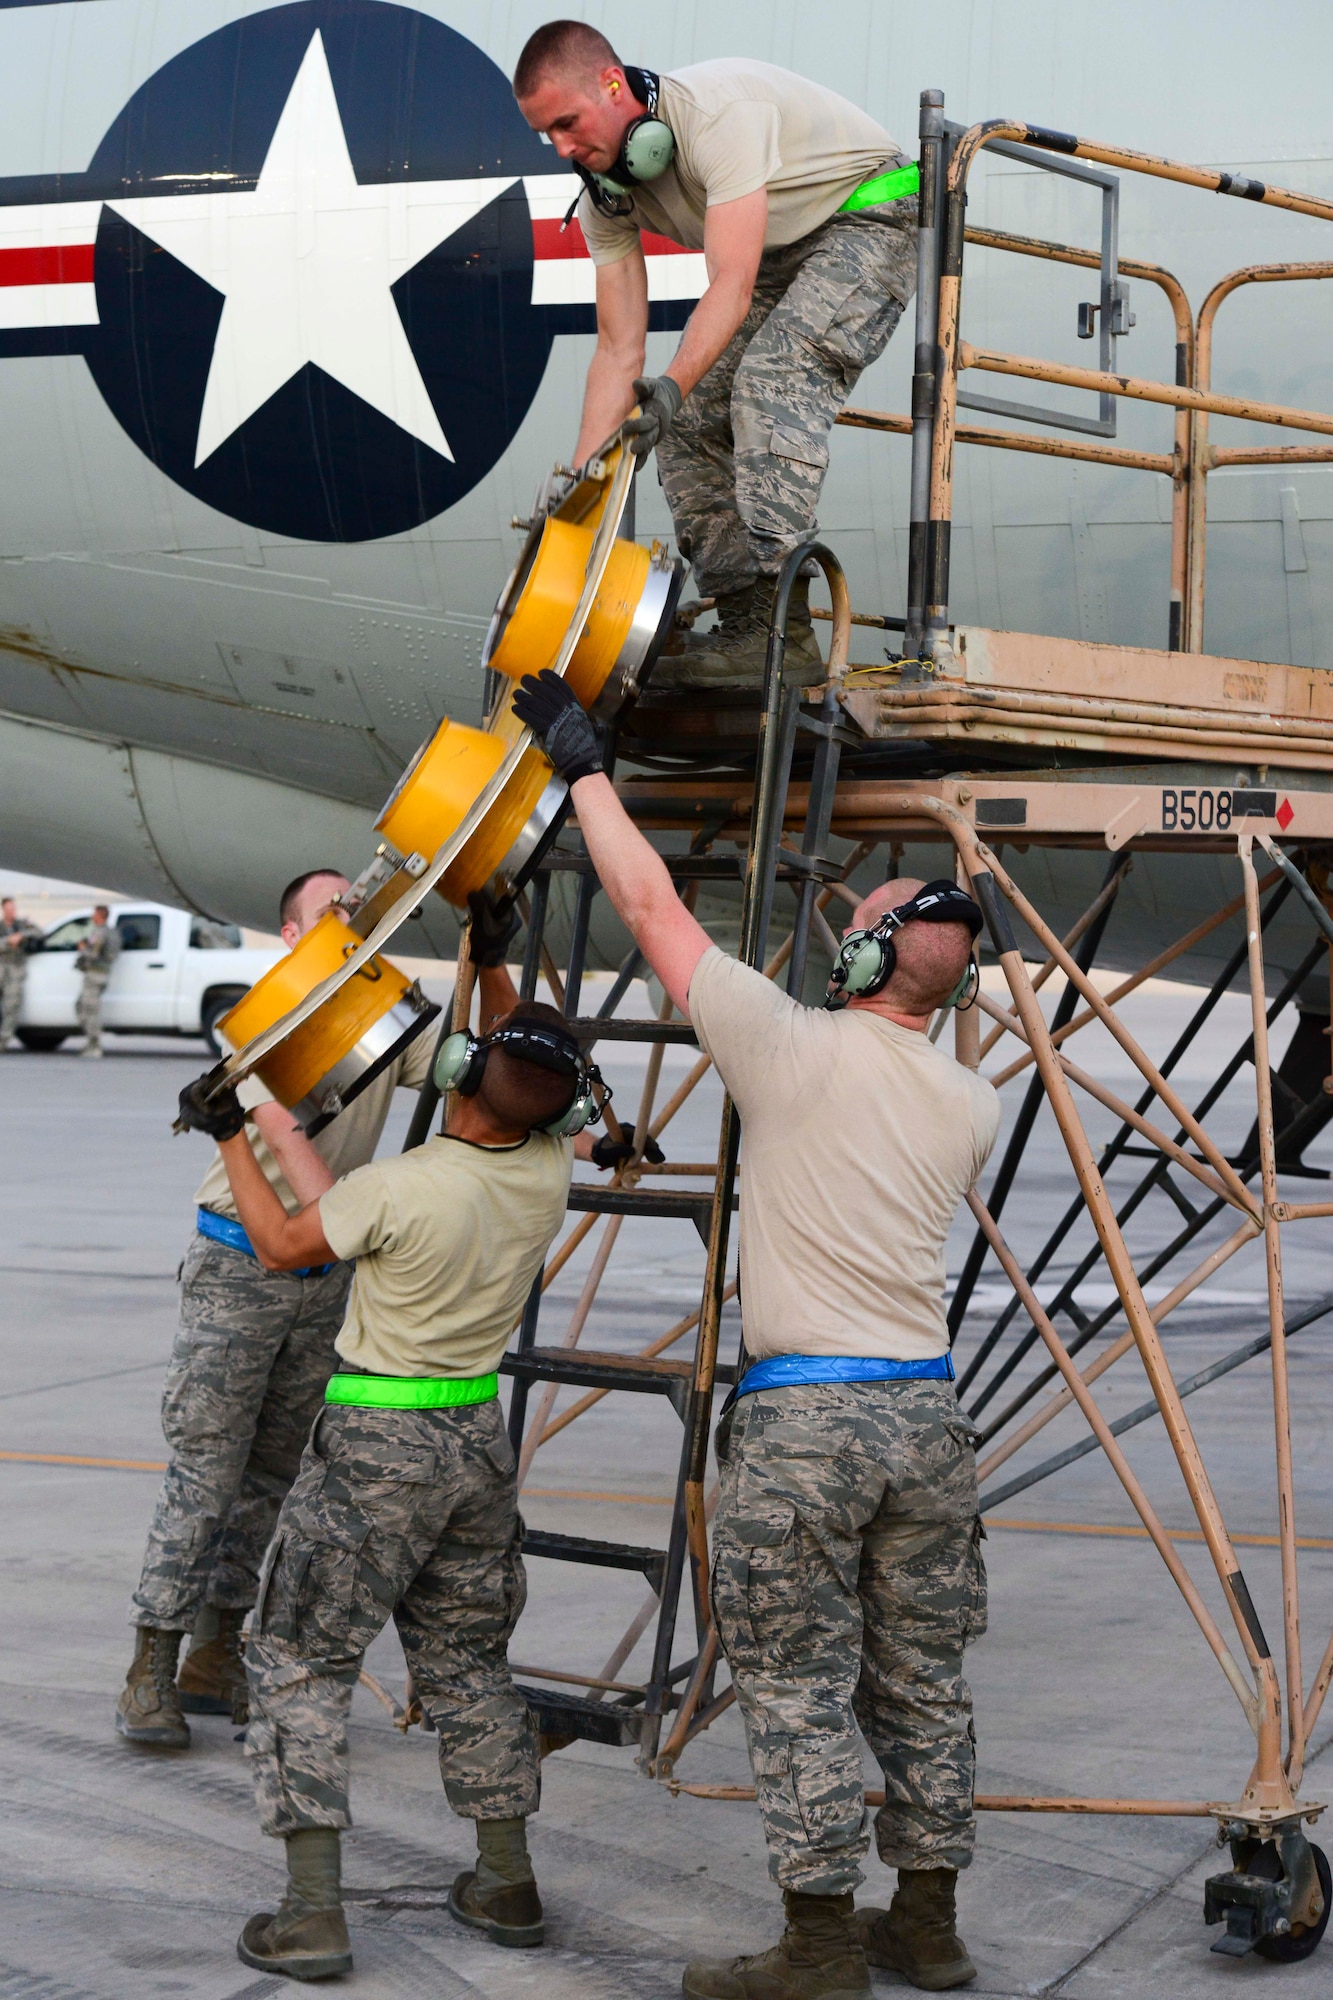 U.S. Air Force Airmen assigned to the 763rd Aircraft Maintenance Unit remove an air hatch adapter from a RC-135 Rivet Joint at Al Udeid Air Base, Qatar, July 11, 2014. The RC-135 provides reconnaisance information and electronic warfare support to theater commanders and combat forces. (U.S. Air Force photo by Staff Sgt. Ciara Wymbs) 